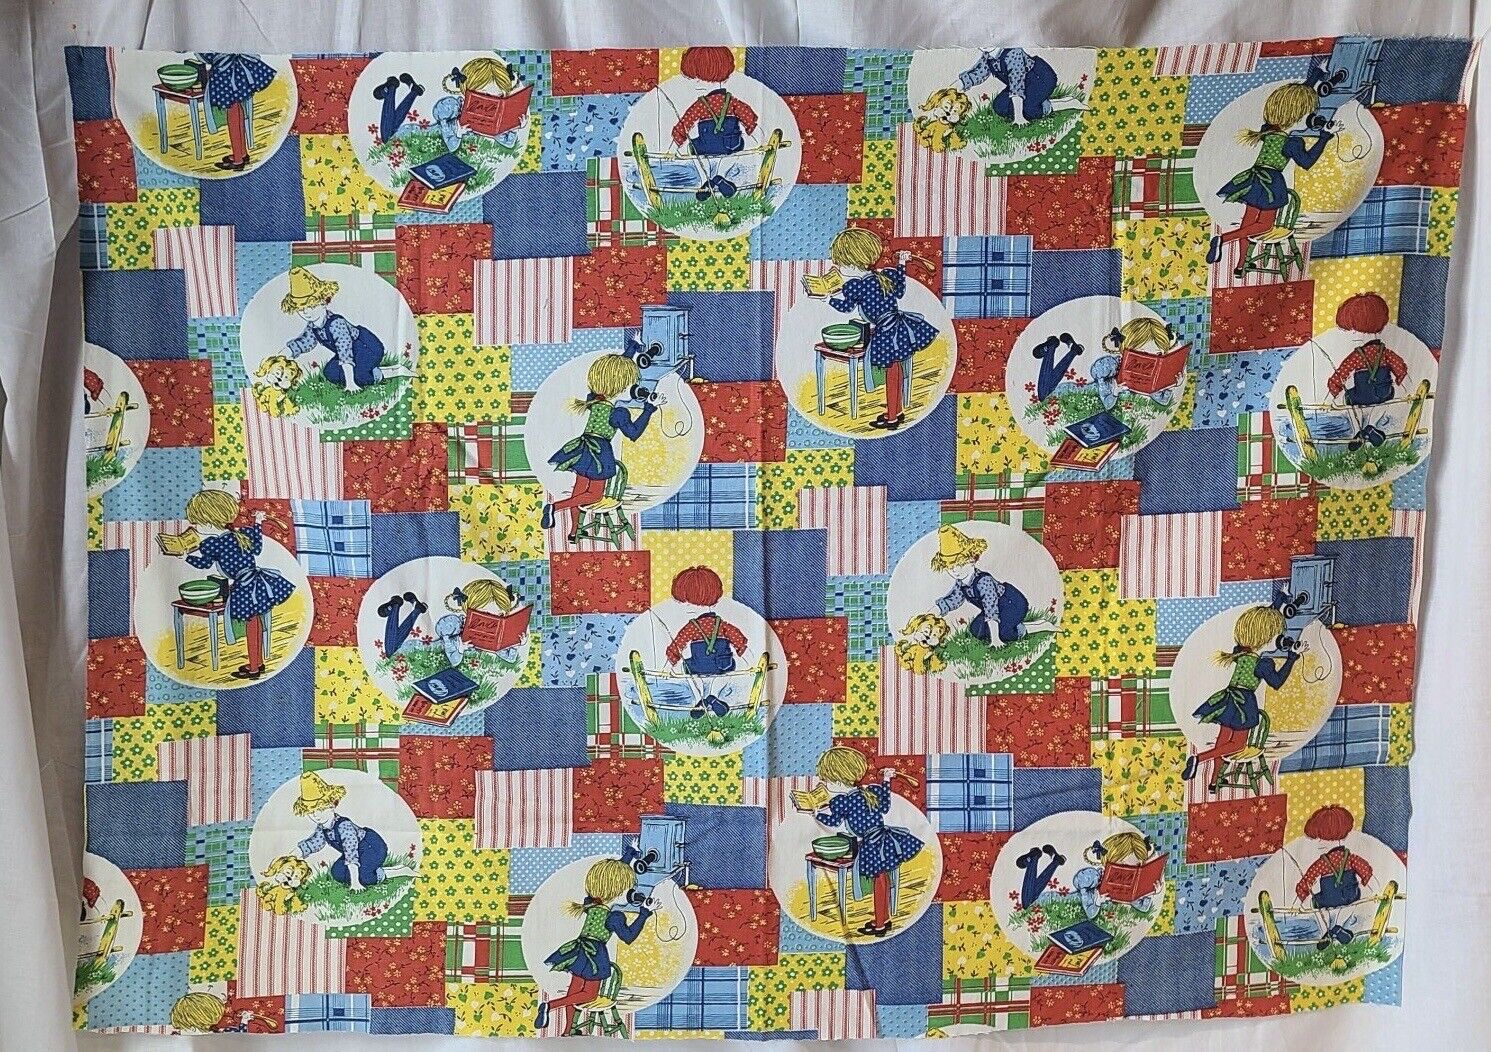 VINTAGE 1970s Holly Hobbie Style Feed Sack Patchwork Calico Print Cotton Fabric